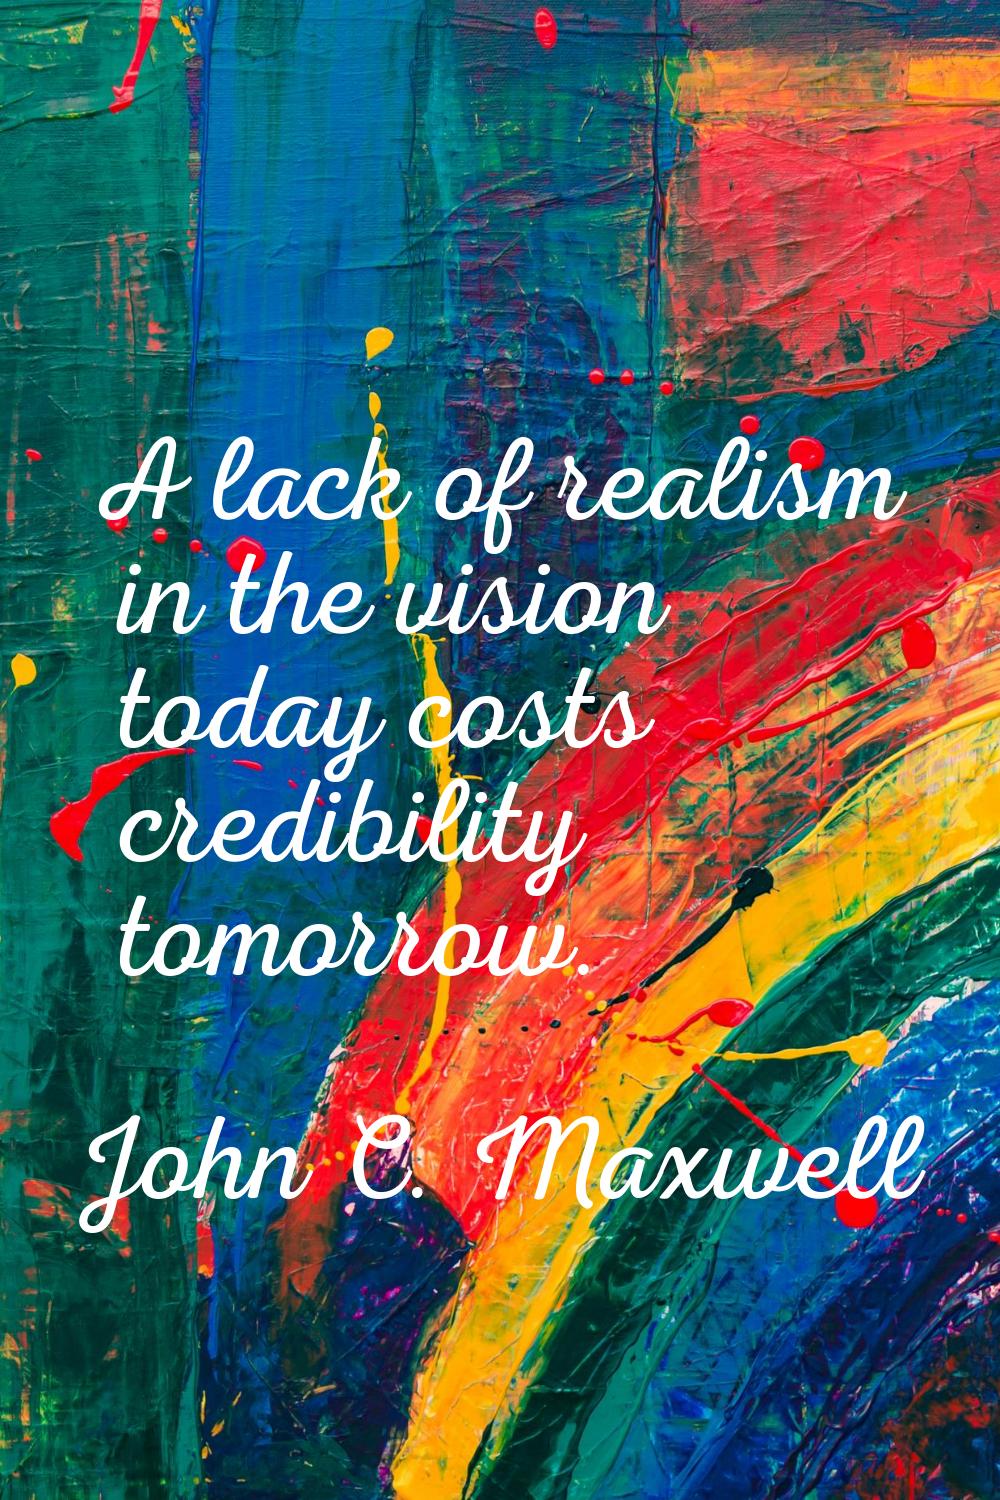 A lack of realism in the vision today costs credibility tomorrow.